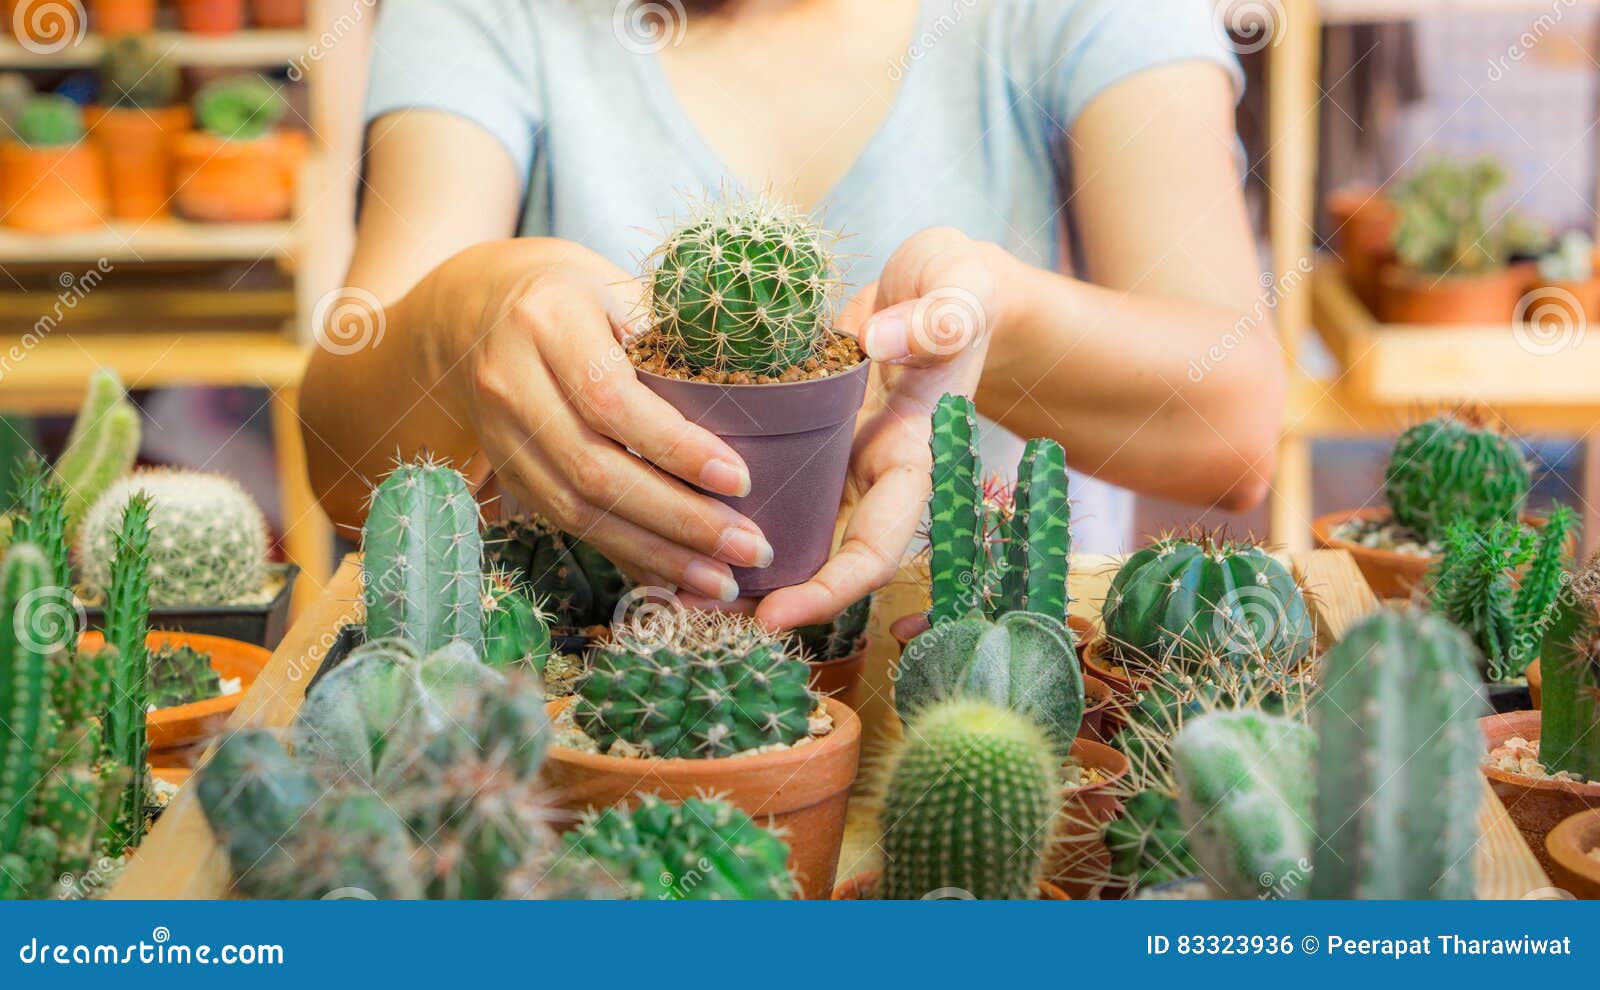 cactus plant and nature concept - cactus holded by hands of woman in glasshouse